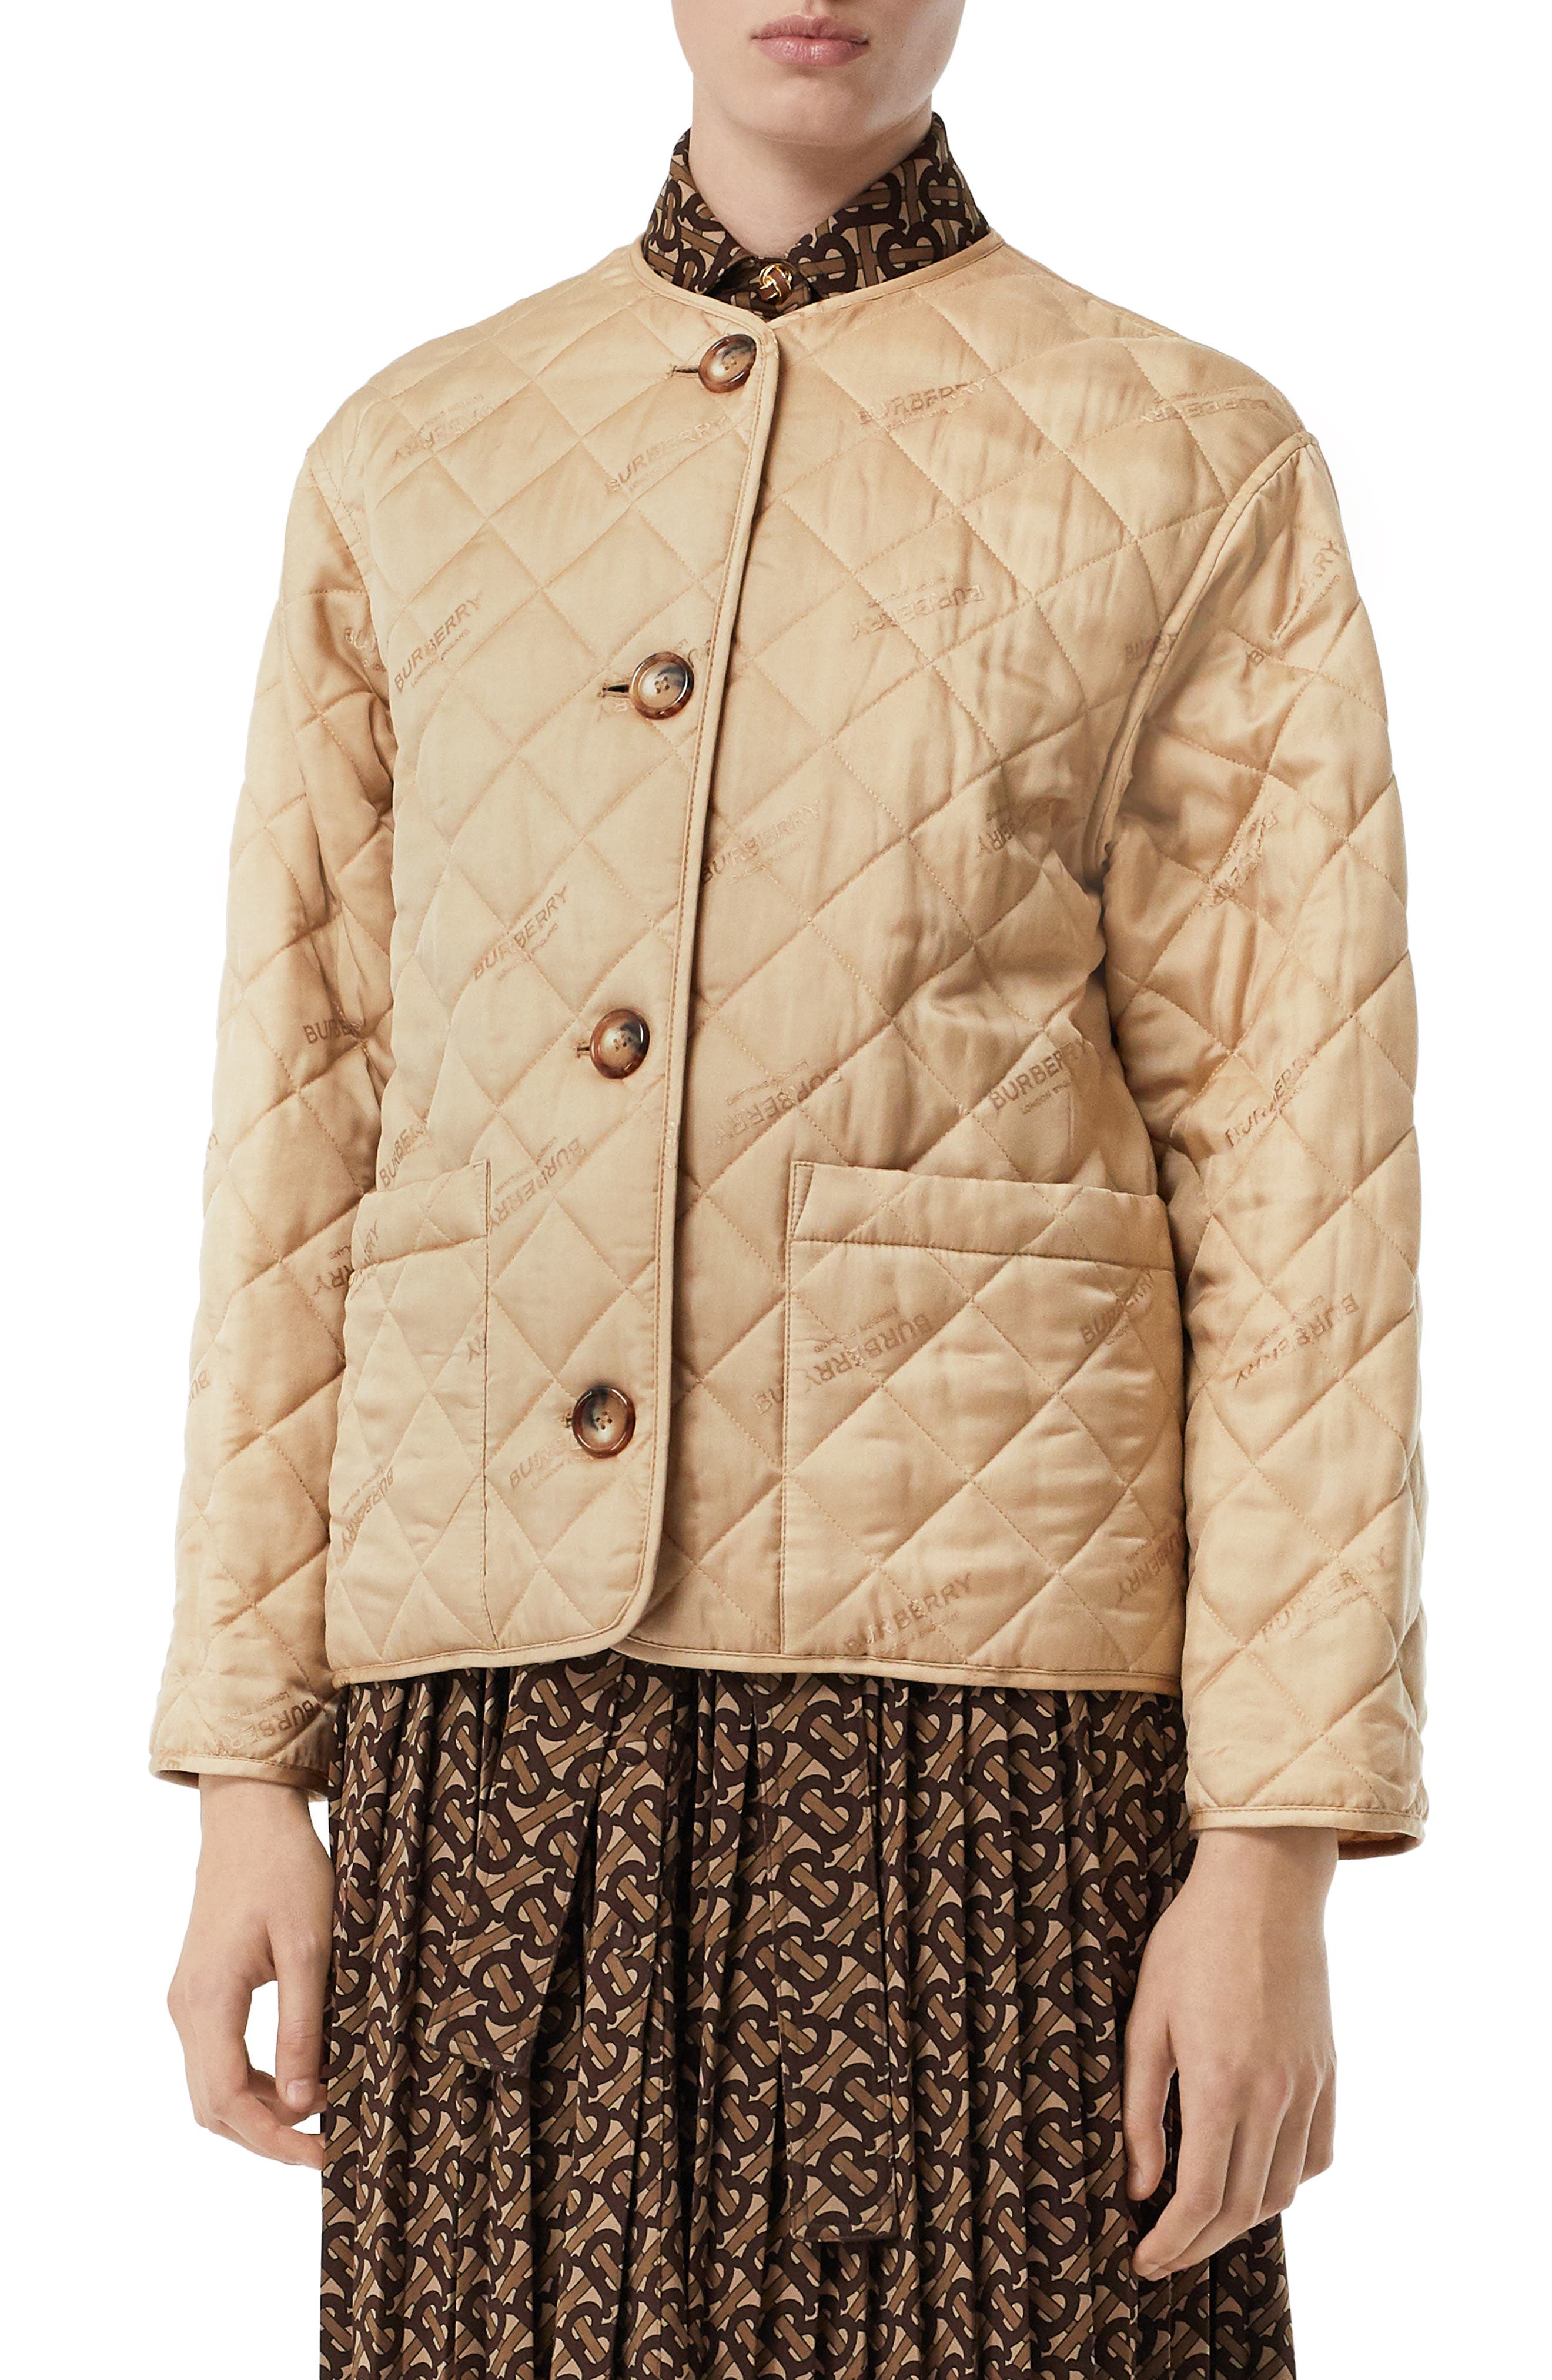 burberry plus size quilted jacket